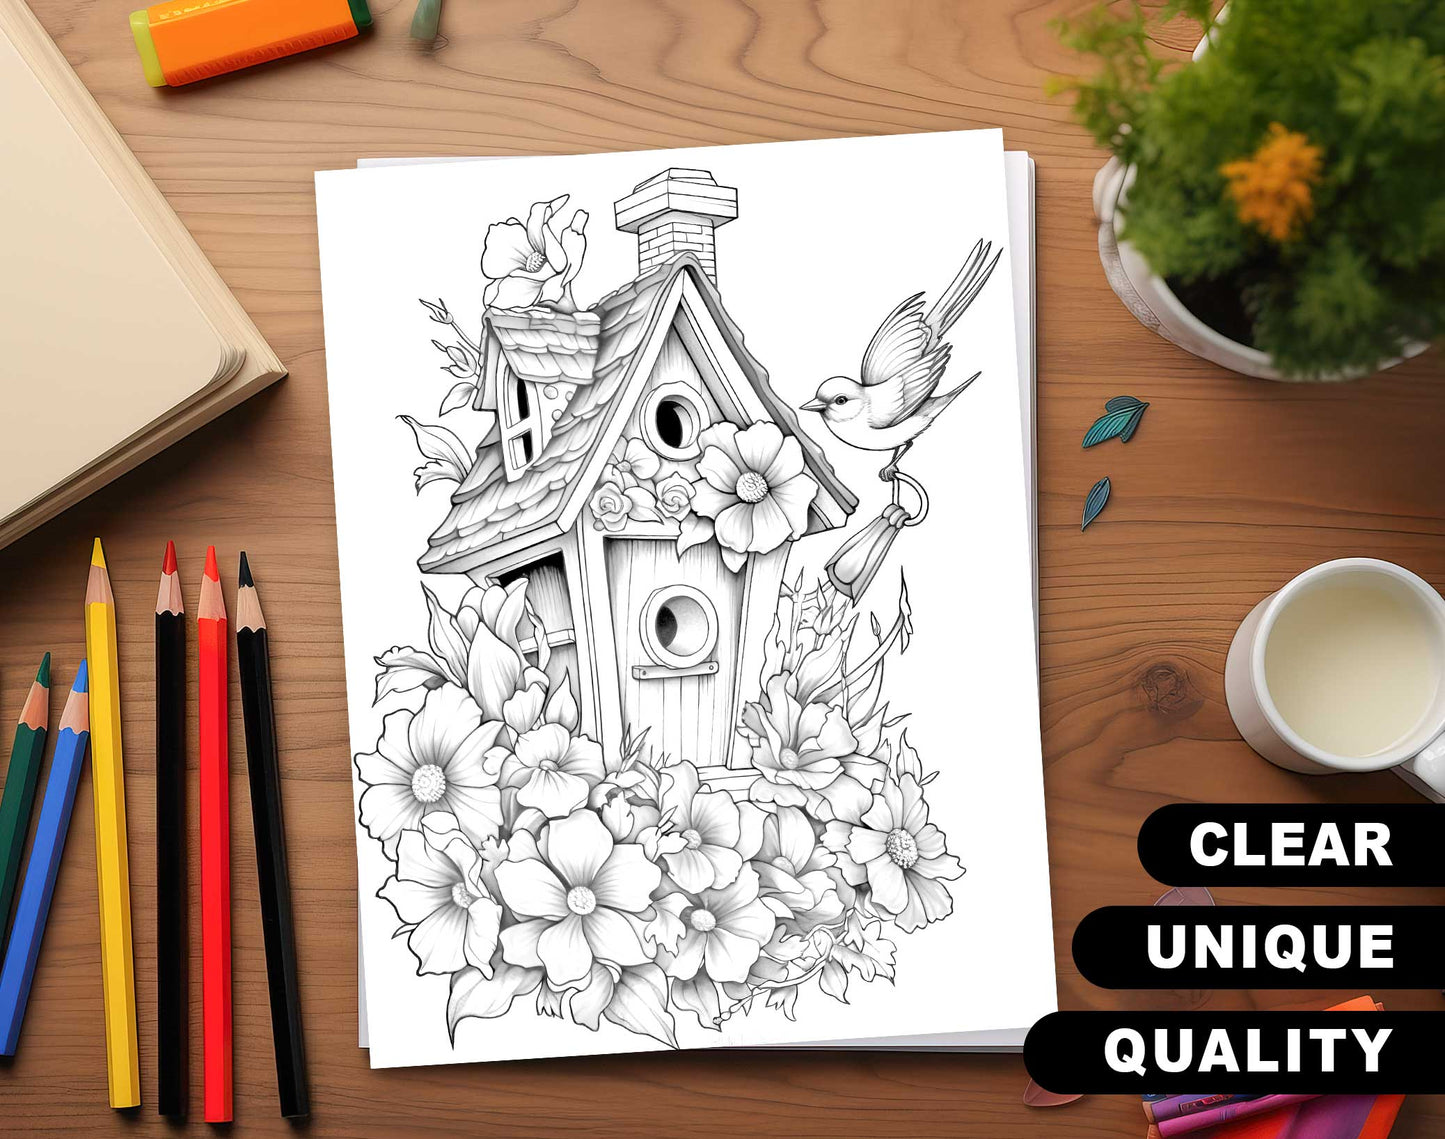 25 Floral Birdhouses Grayscale Coloring Pages - Instant Download - Printable Dark/Light